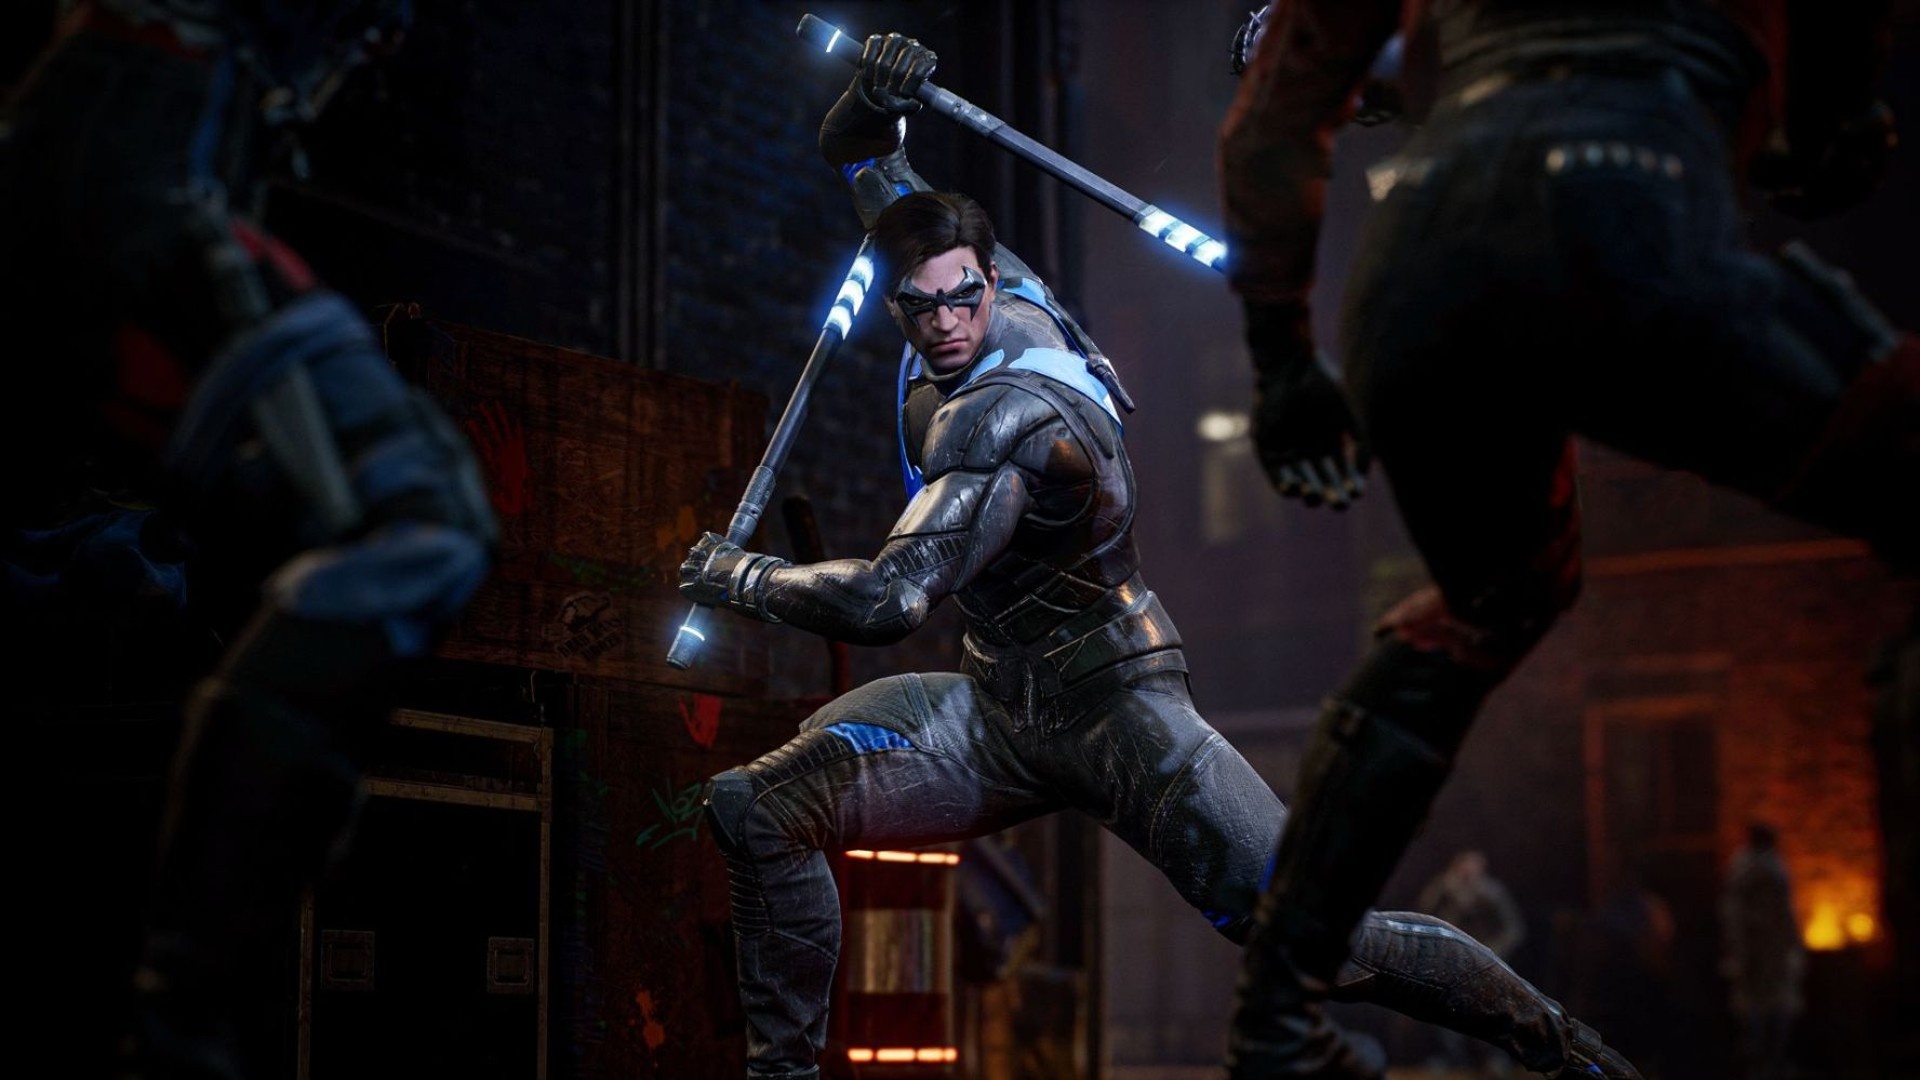 Gotham Knights (Game): Nightwing, Equipped with his iconic escrima sticks. 1920x1080 Full HD Background.